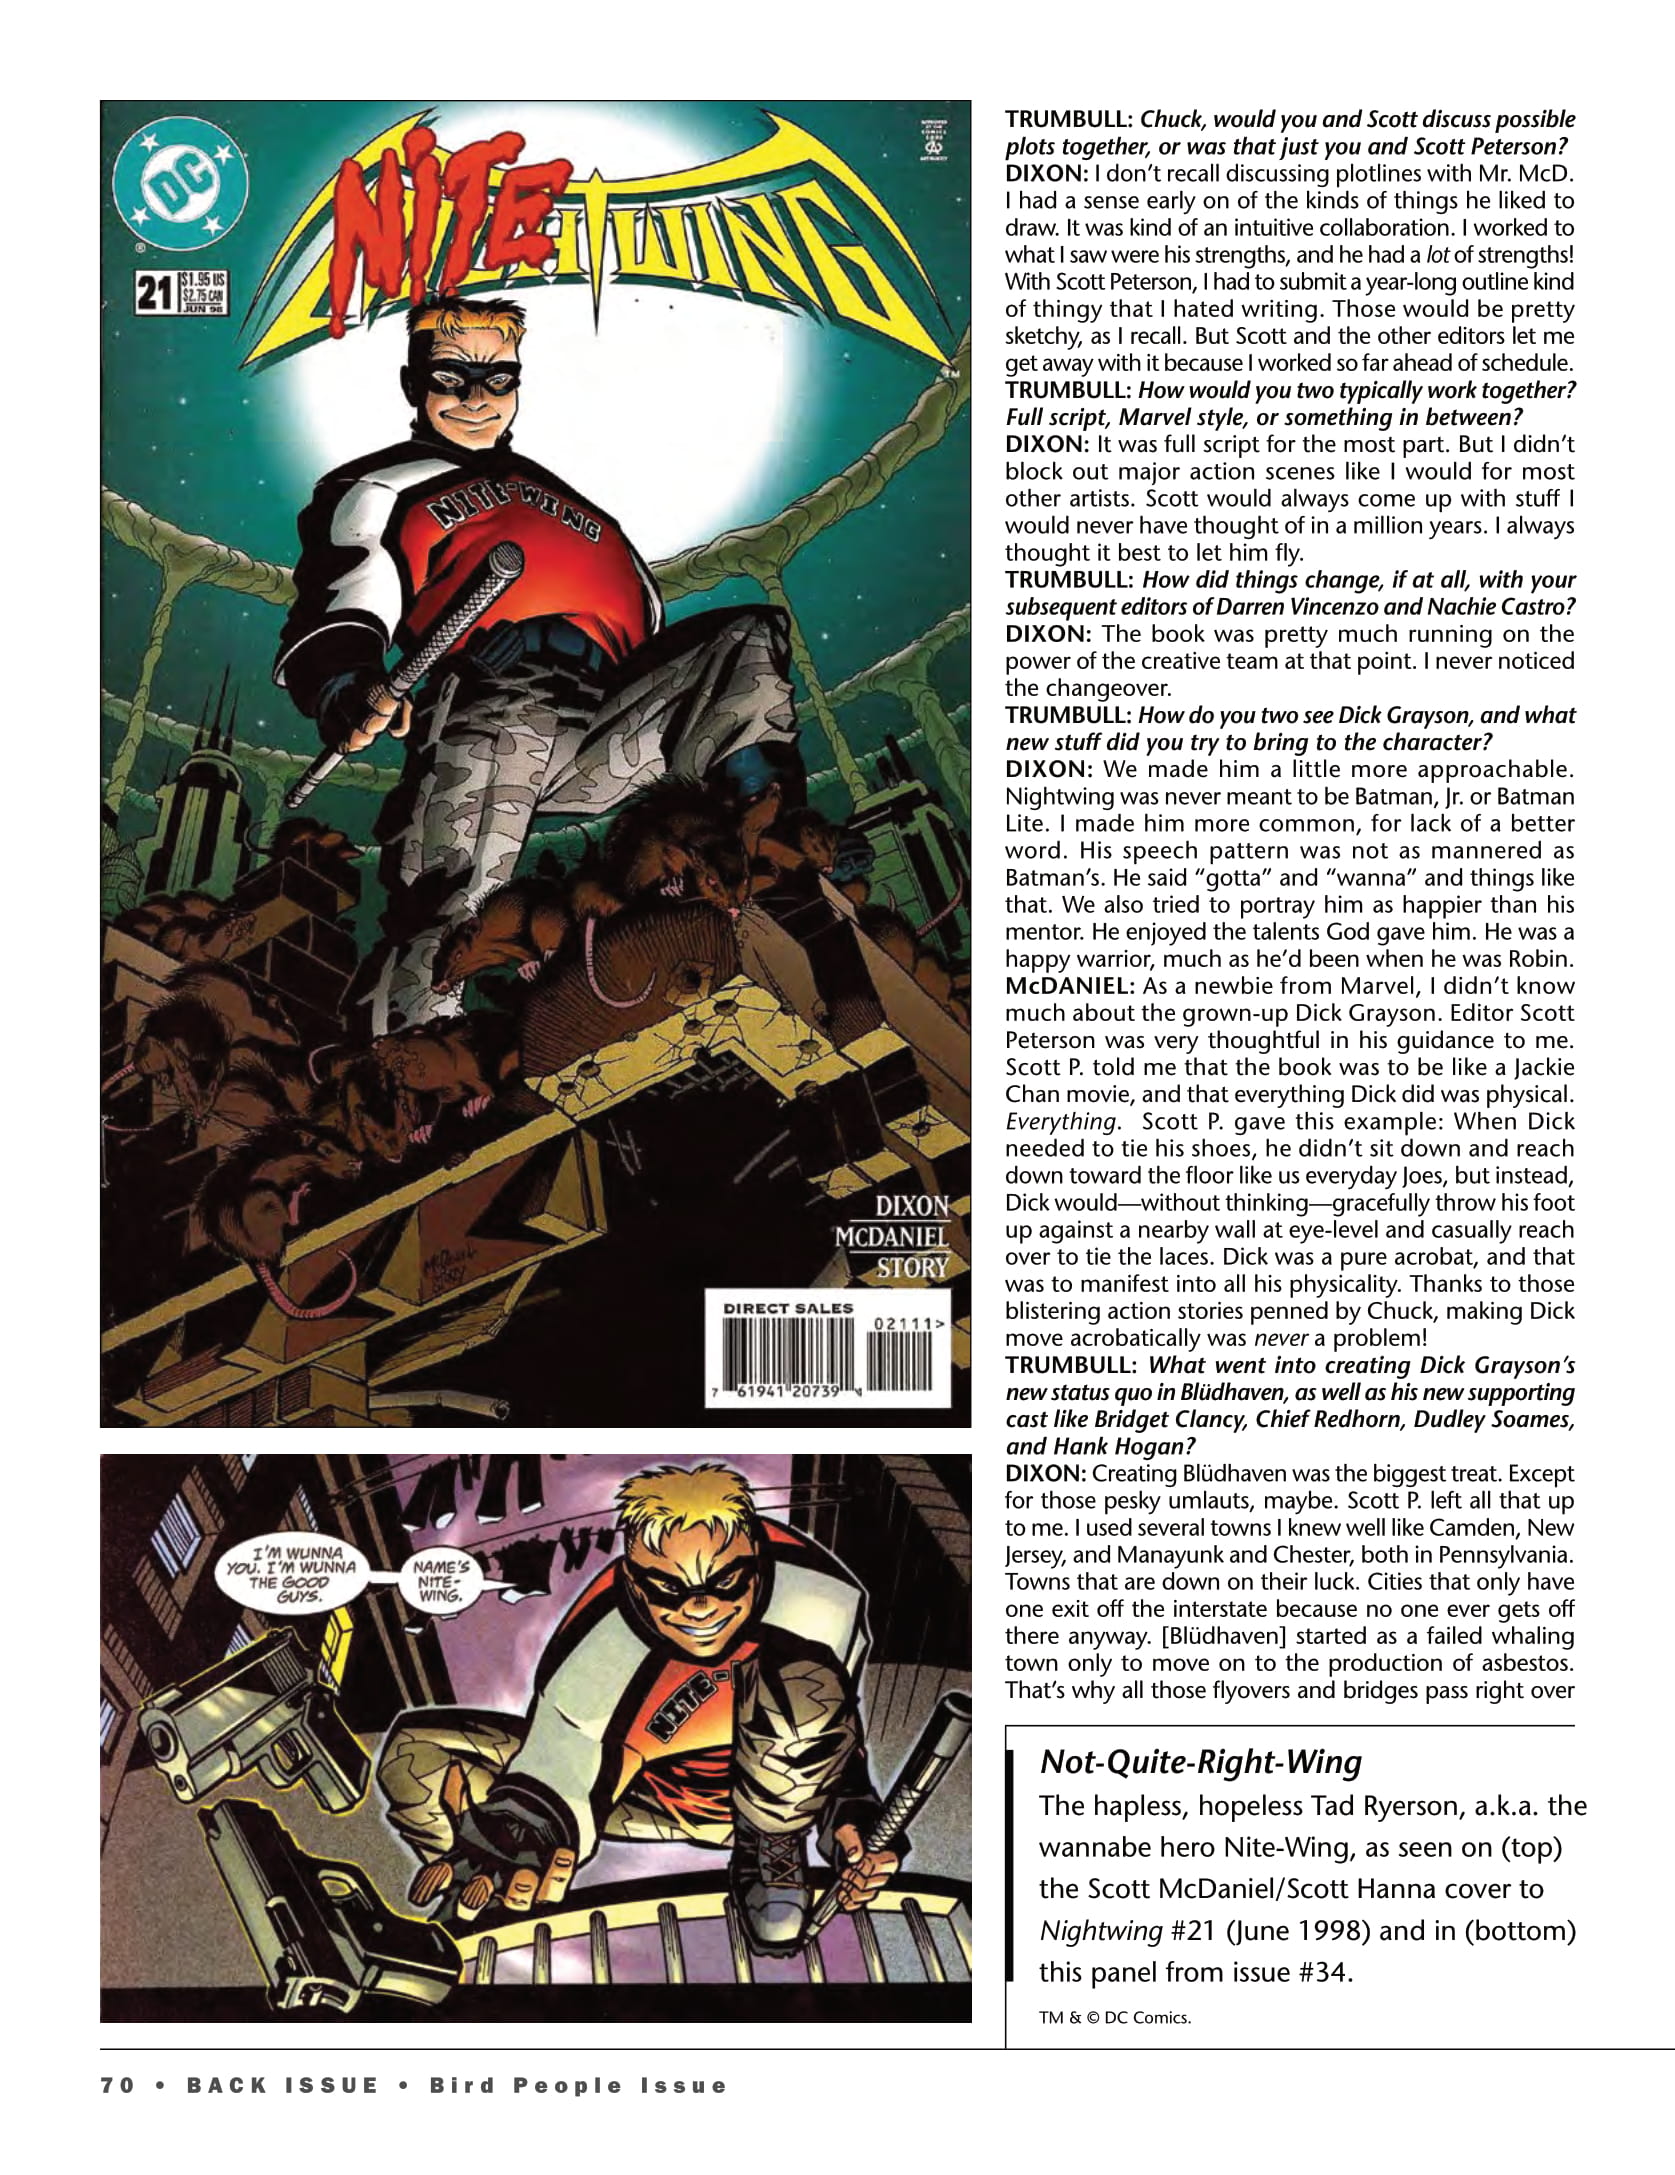 Read online Back Issue comic -  Issue #97 - 72